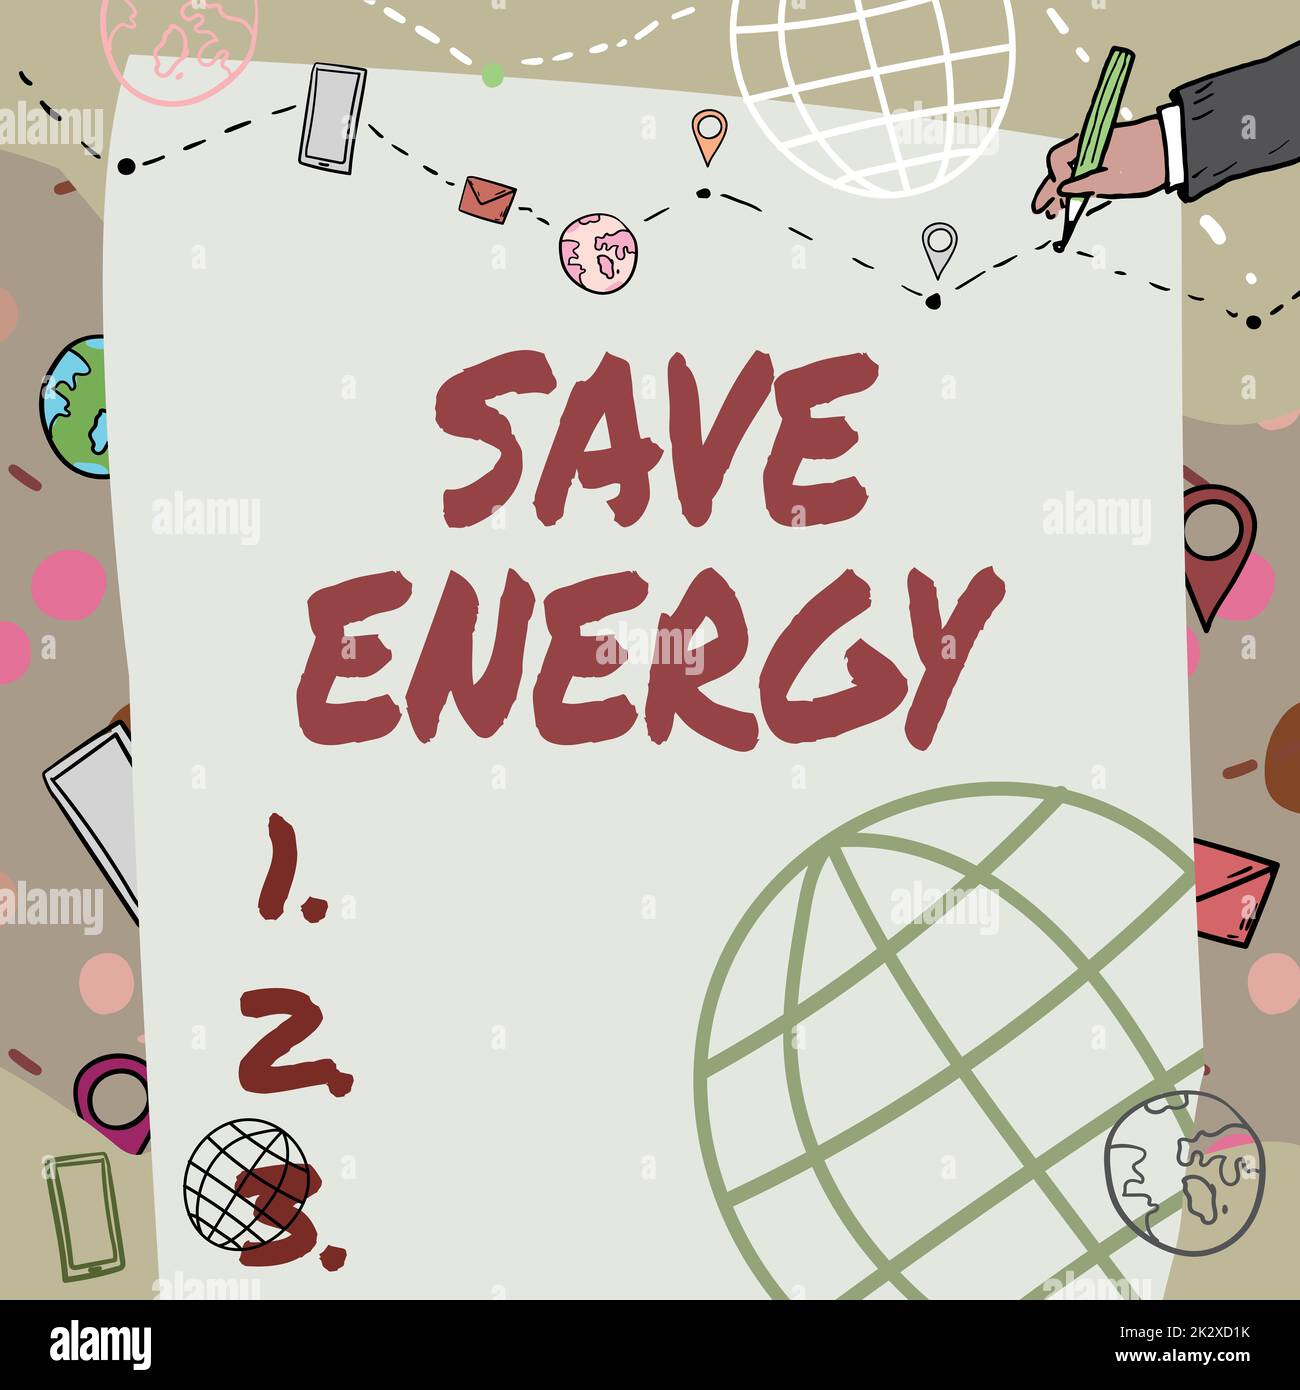 Text caption presenting Save Energy. Business idea decreasing the amount of power used achieving a similar outcome Plain Whiteboard With Hand Drawing Guide Line For Steps Over World Globe. Stock Photo